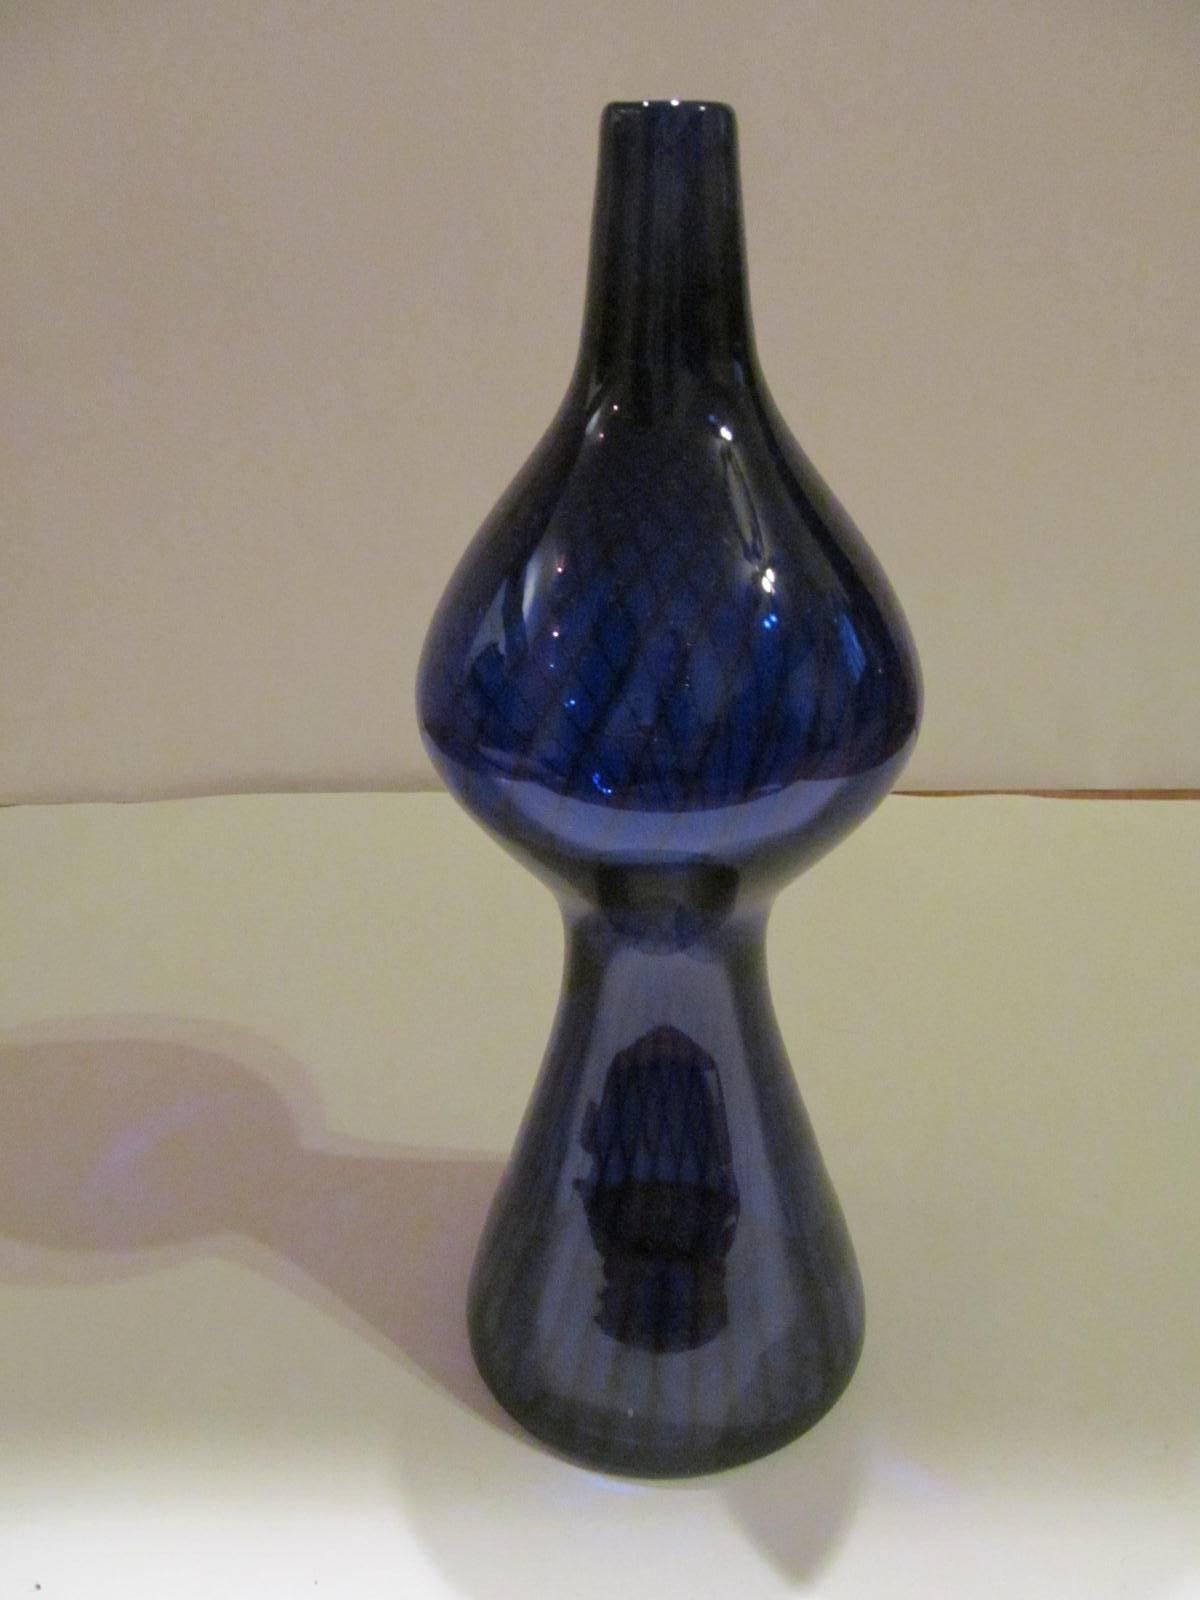 Amazing form Kosta Unika vase designed by Vicke Linstrand. Signed on the bottom as pictured.